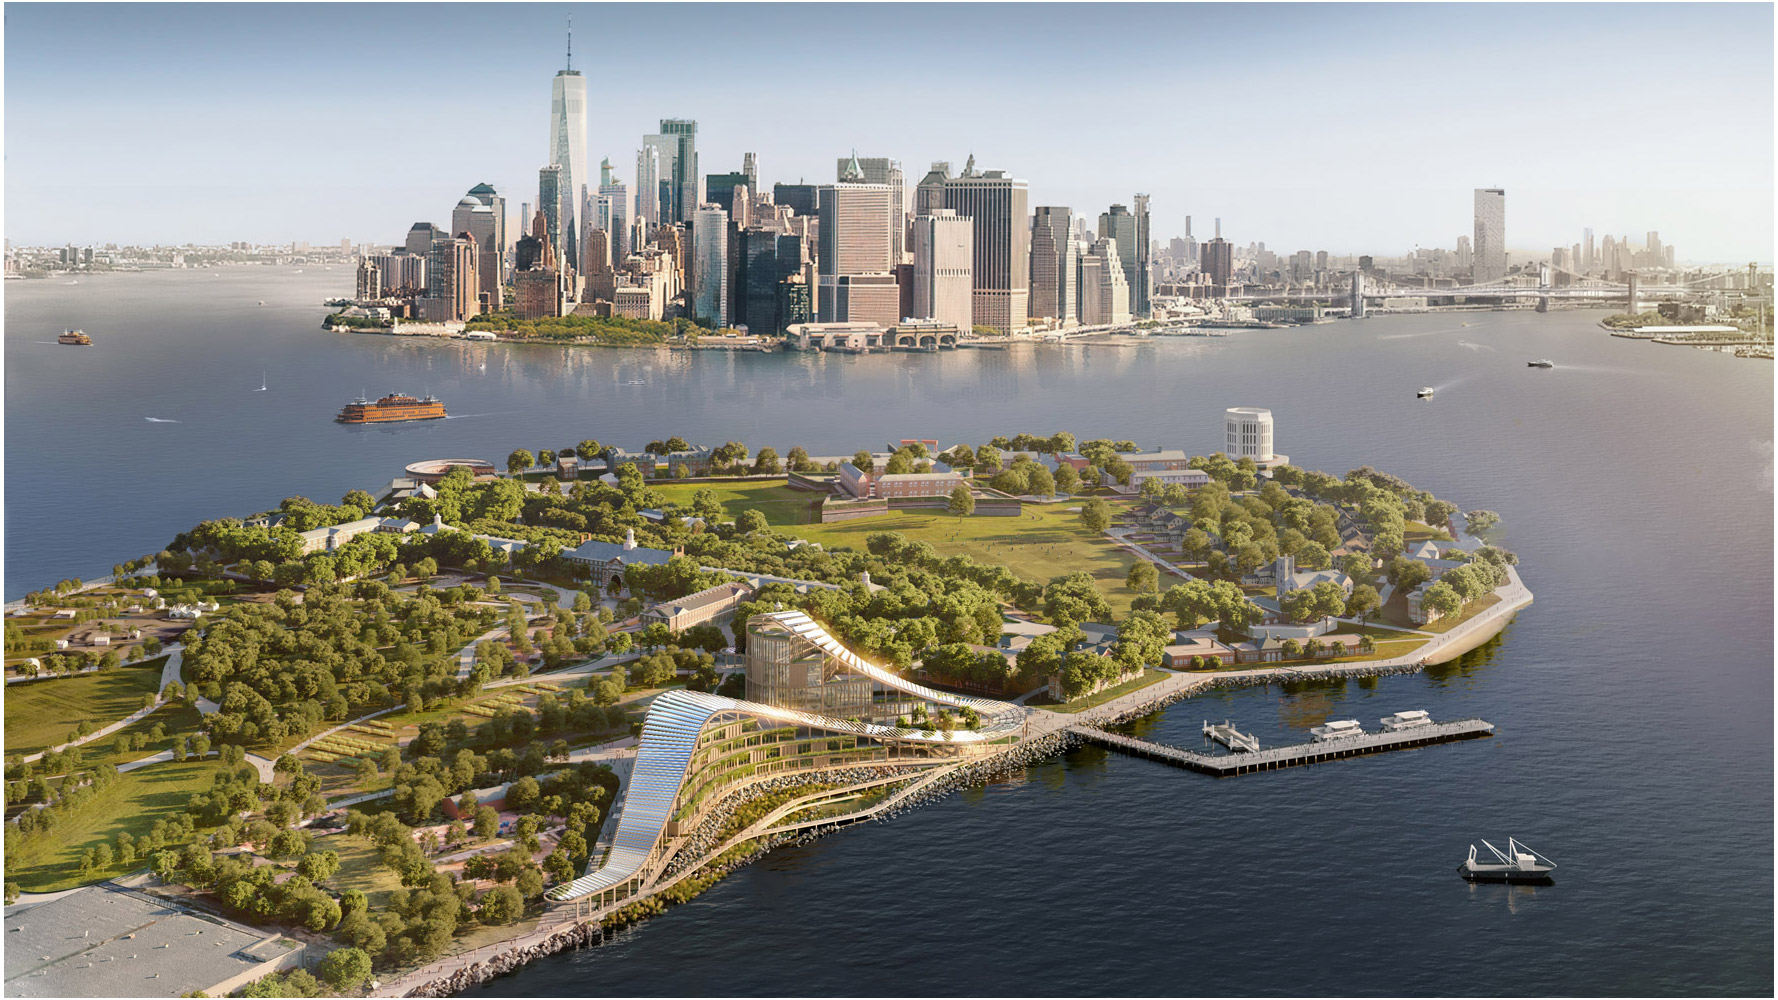 An SOM-Designed Climate Hub Anchored by Stony Brook University is Coming to New York's Governors Island